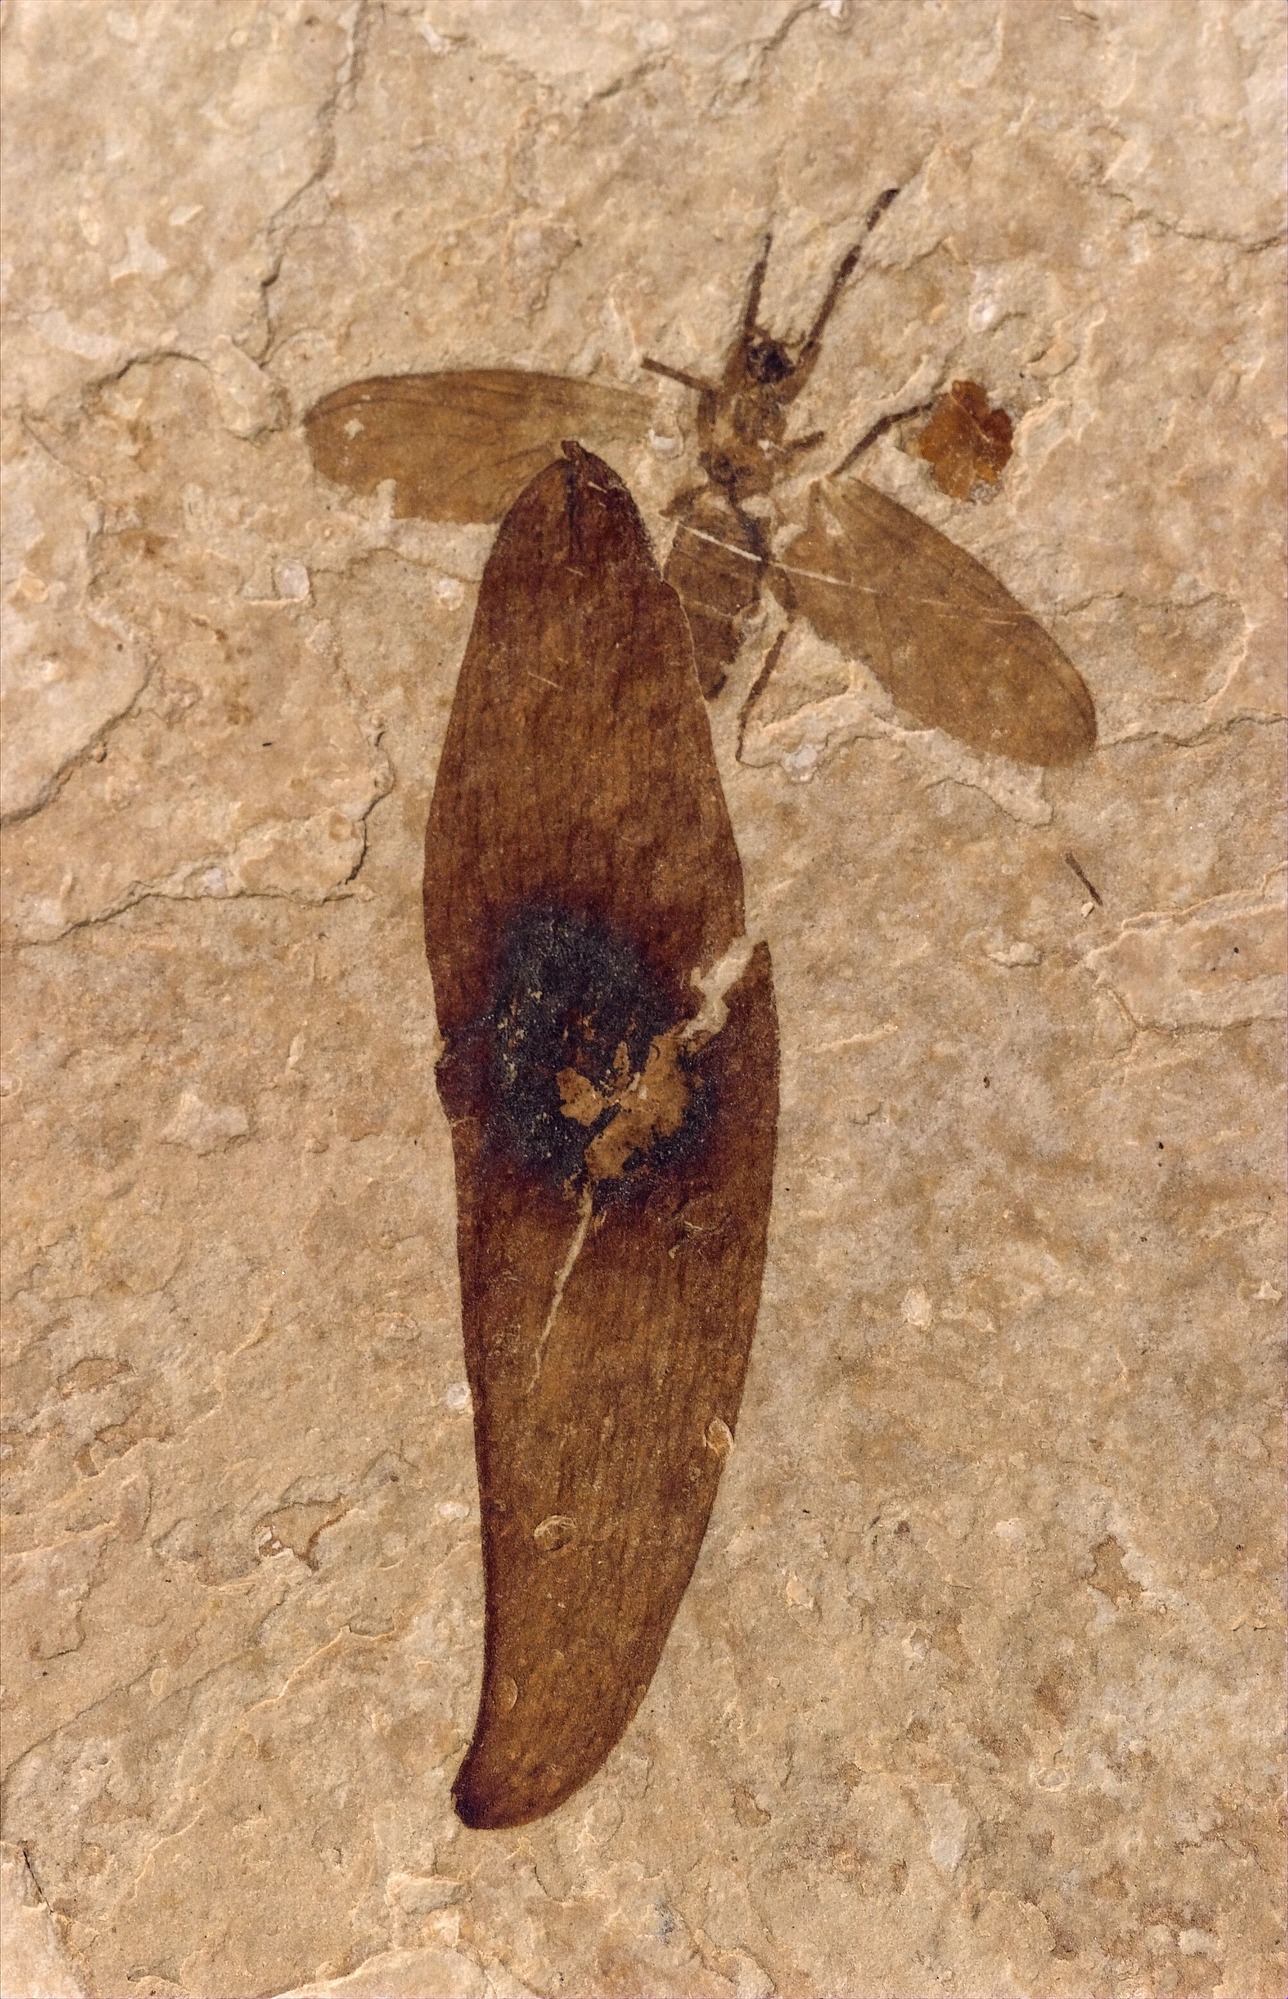 A dark brown oblong seed fossil partially covers the abdomen and wing of a dark brown fly fossil on tan stone.